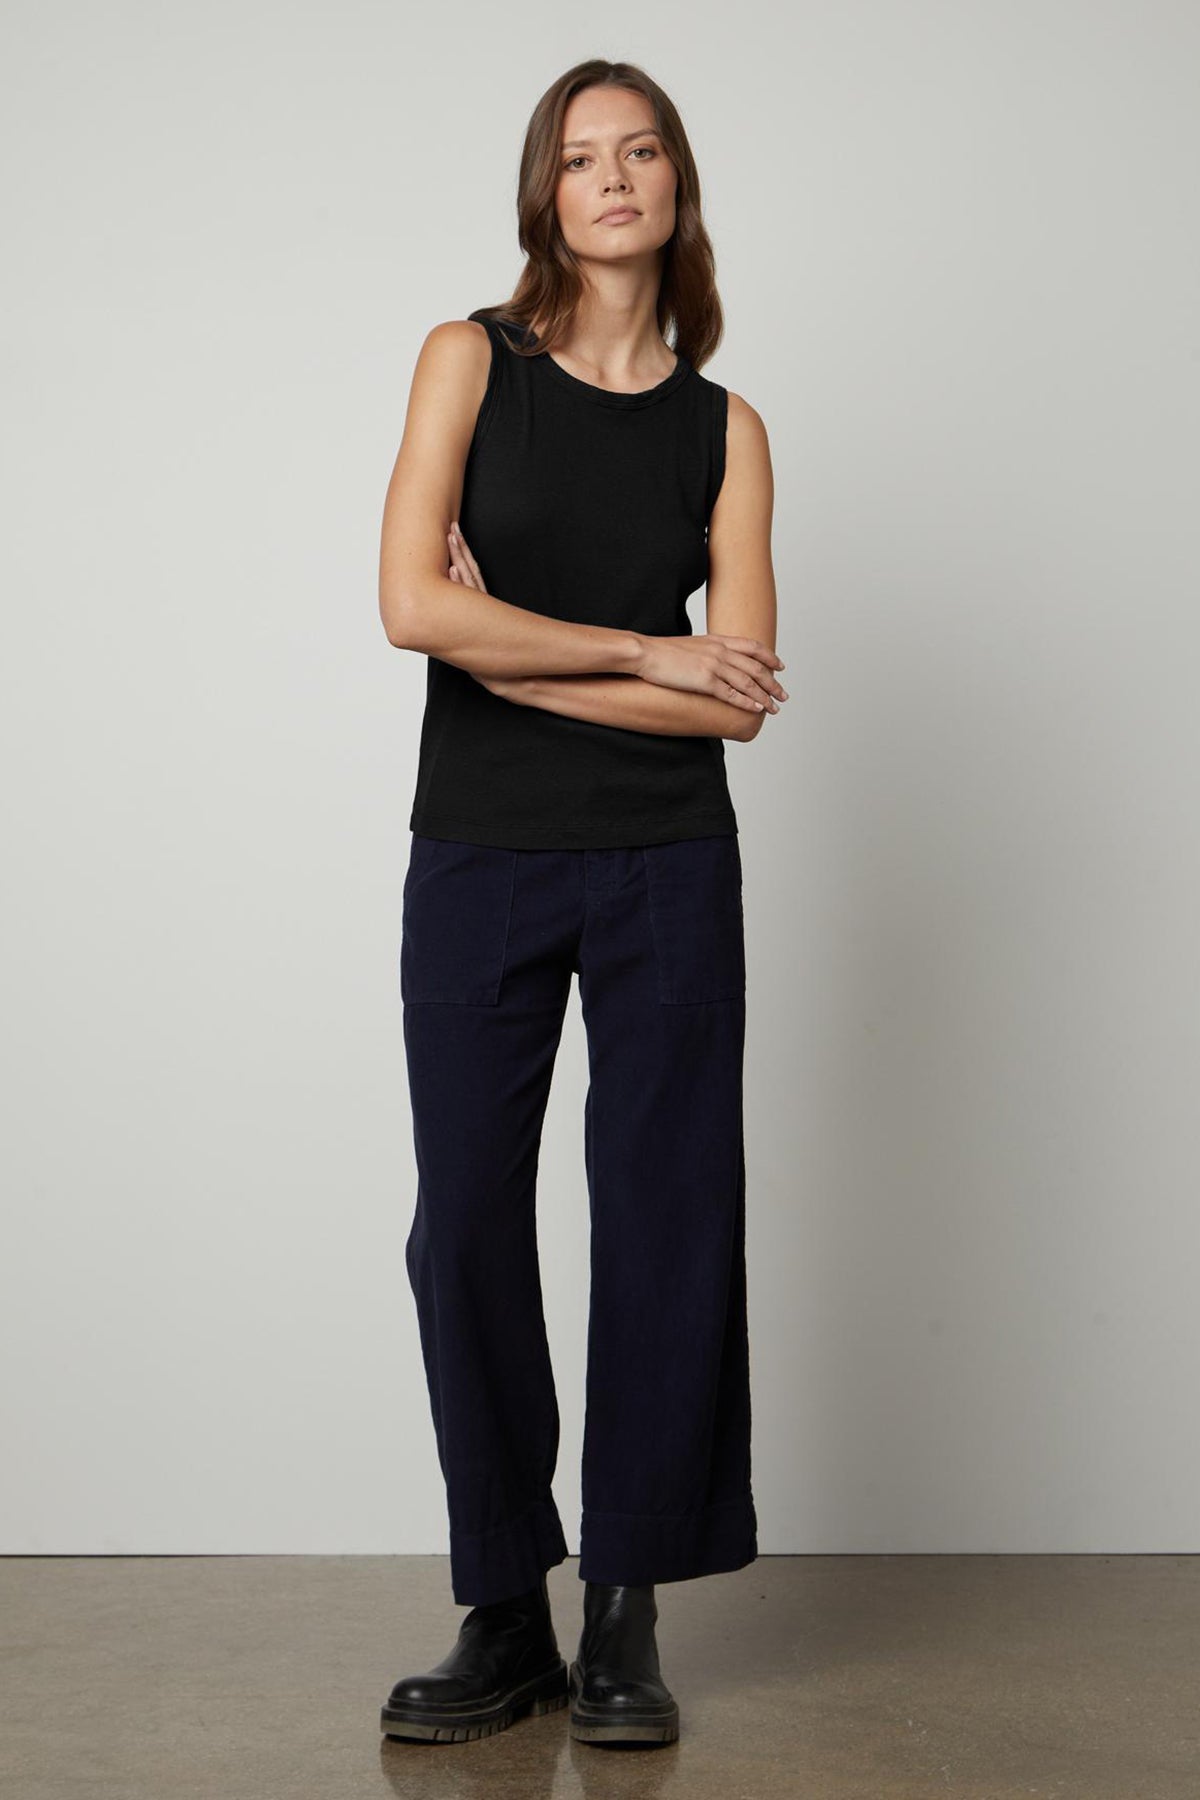 The model is wearing a black tank top and Velvet by Graham & Spencer's VERA CORDUROY WIDE LEG PANT.-26736250618049